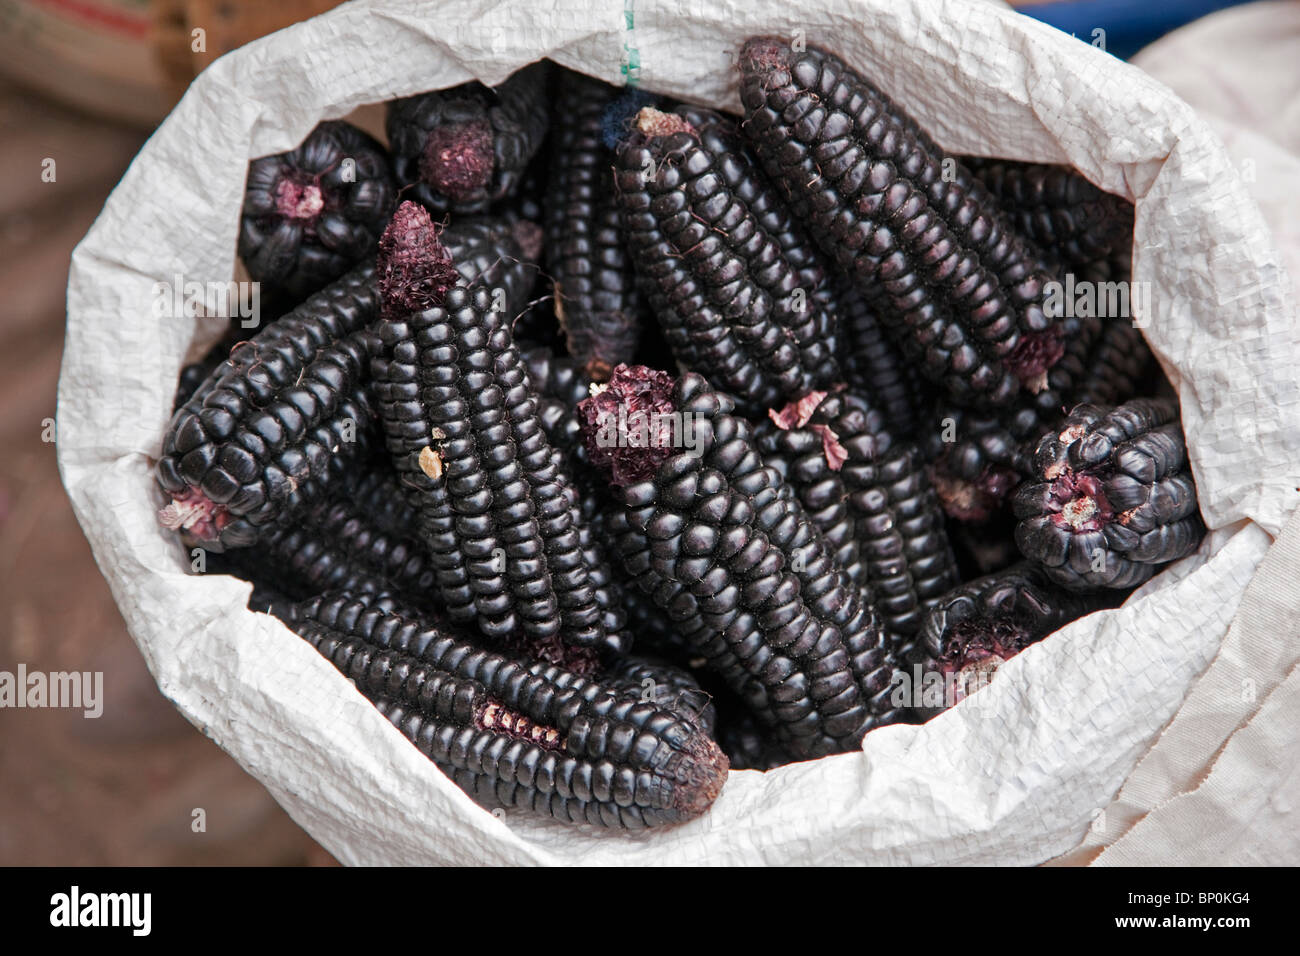 Peru. Black maize cobs, or corn, for sale at Pisac market during the busy weekly Sunday market. Stock Photo